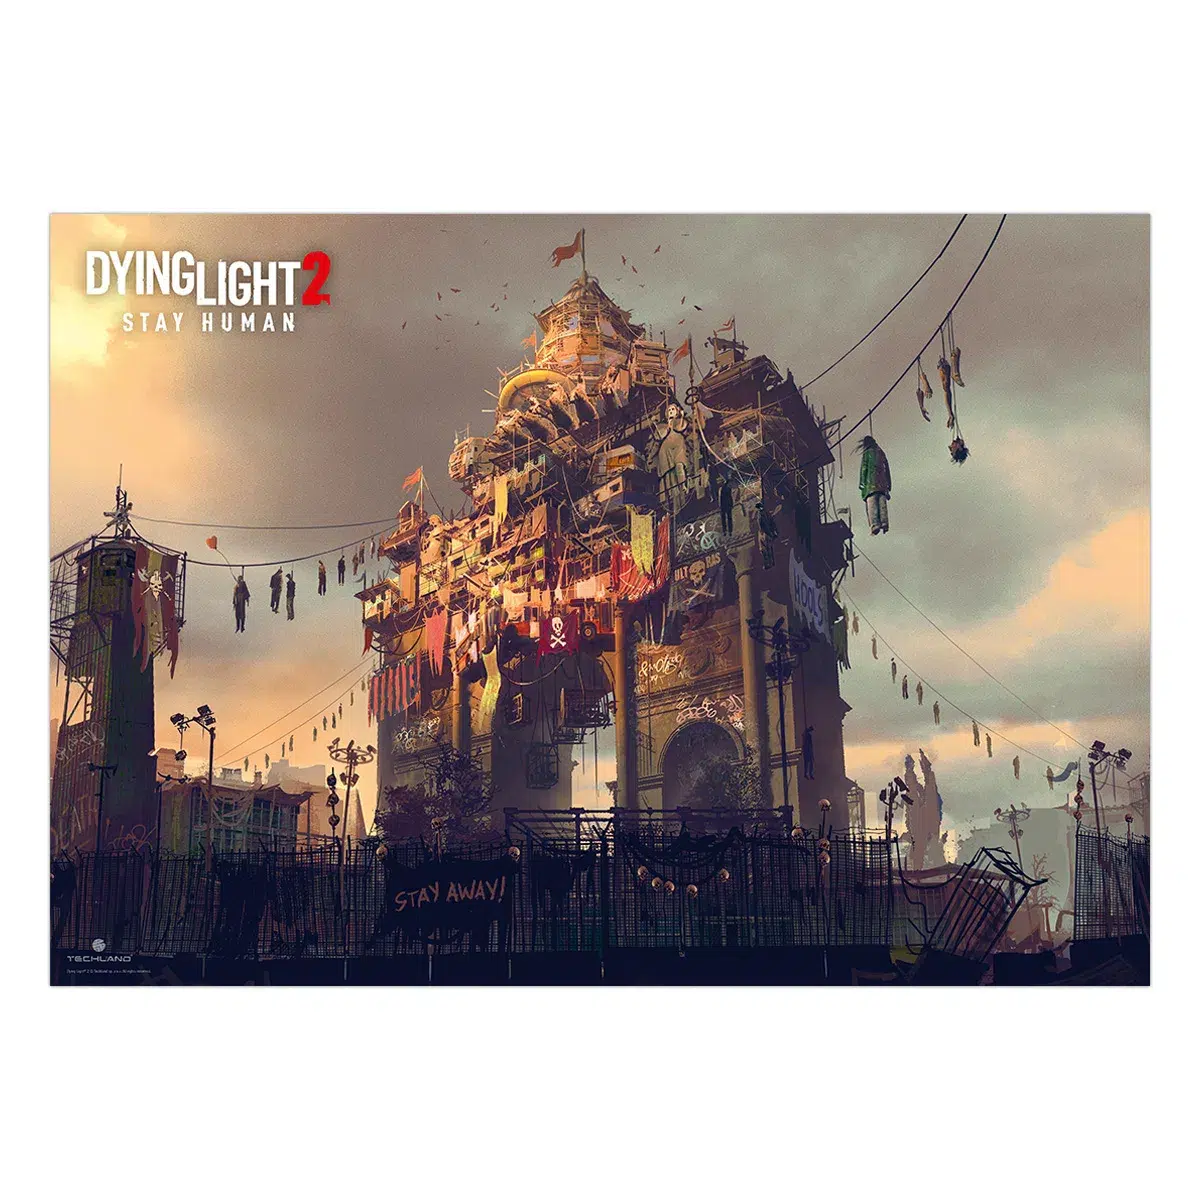 Dying Light 2 Puzzle "Arch" (1000 pcs) Image 4